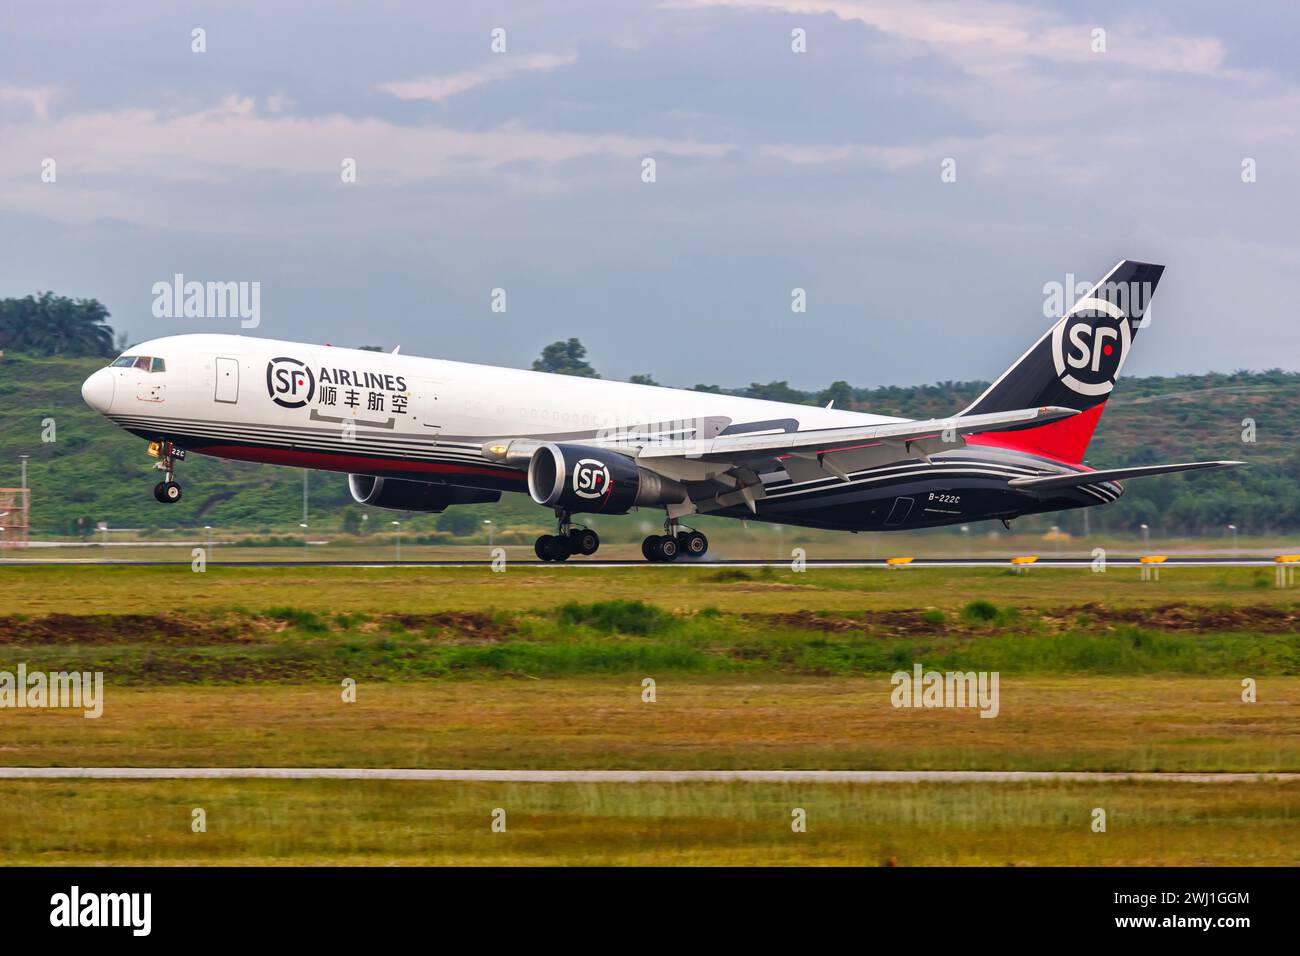 SF Airlines Boeing 767-300(ER)(BCF) aircraft Kuala Lumpur Airport in Malaysia Stock Photo